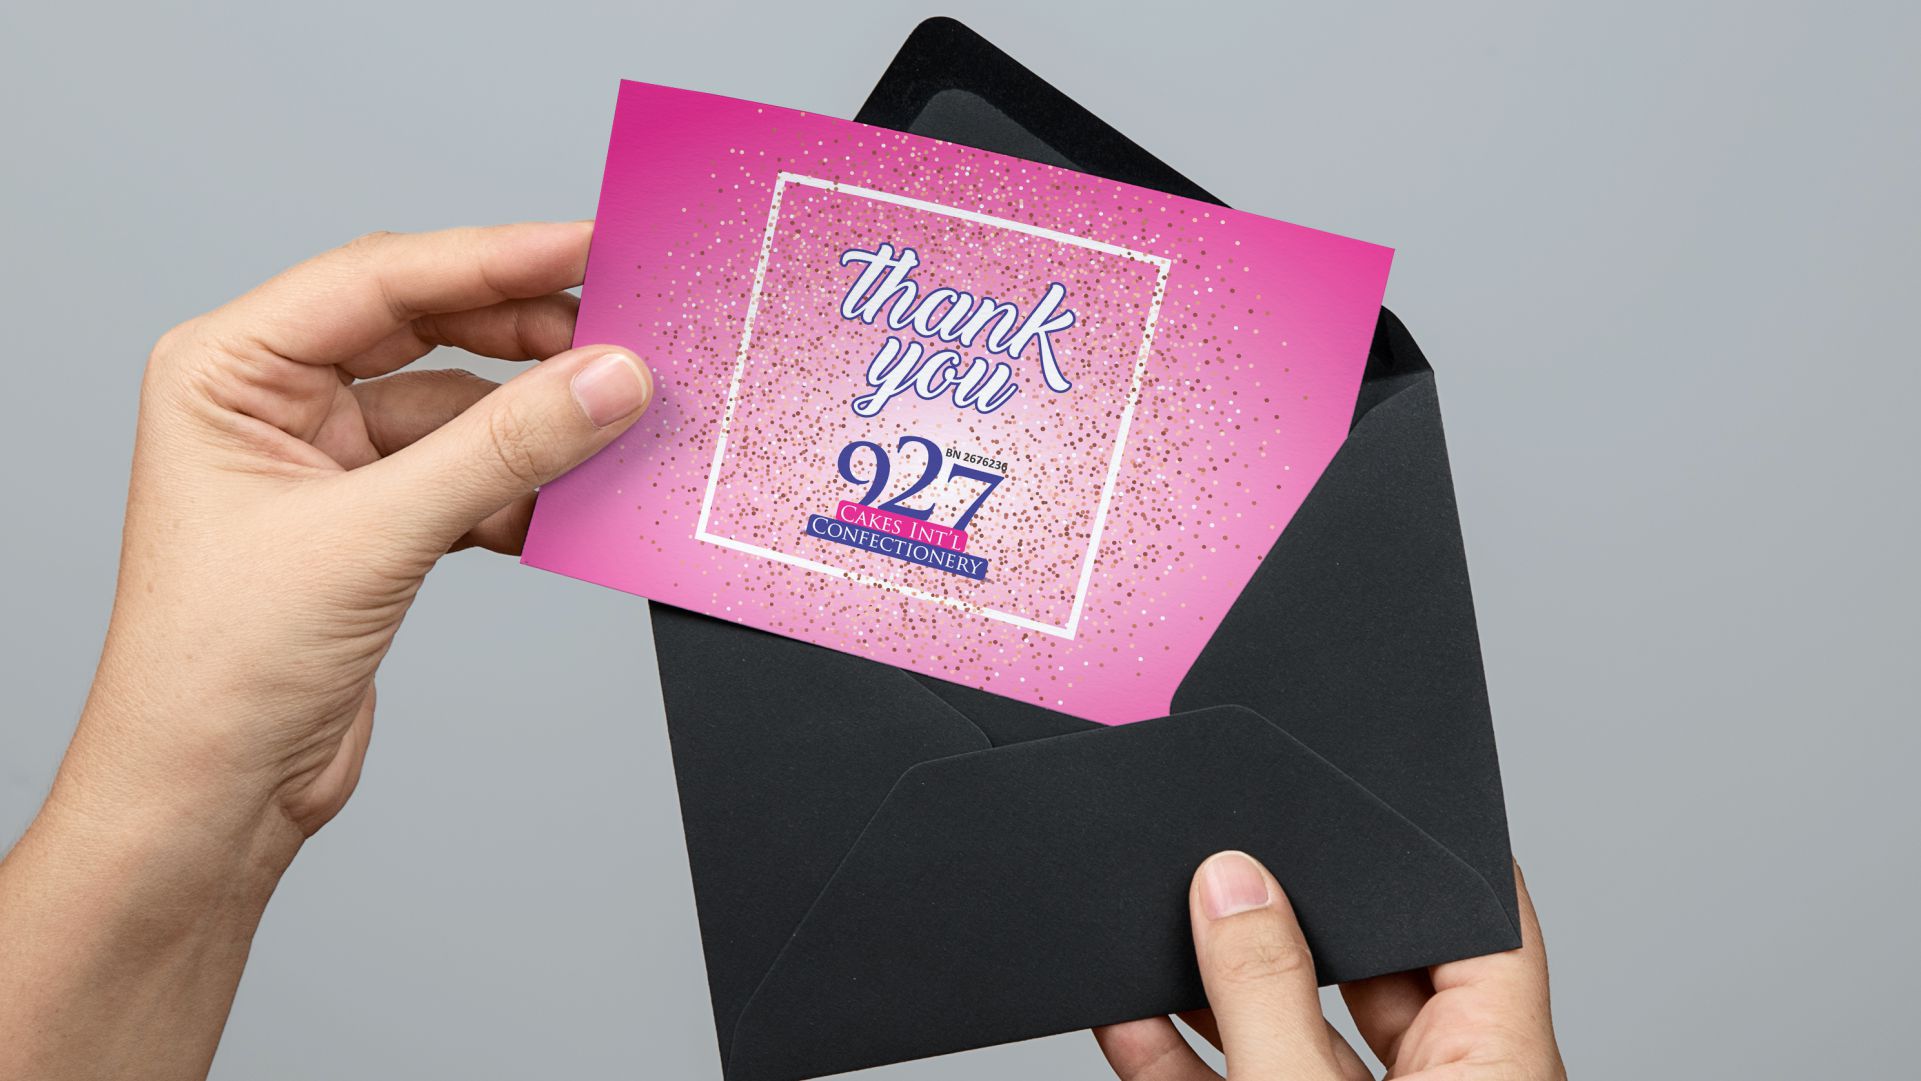 Thank You Card Design and Printing